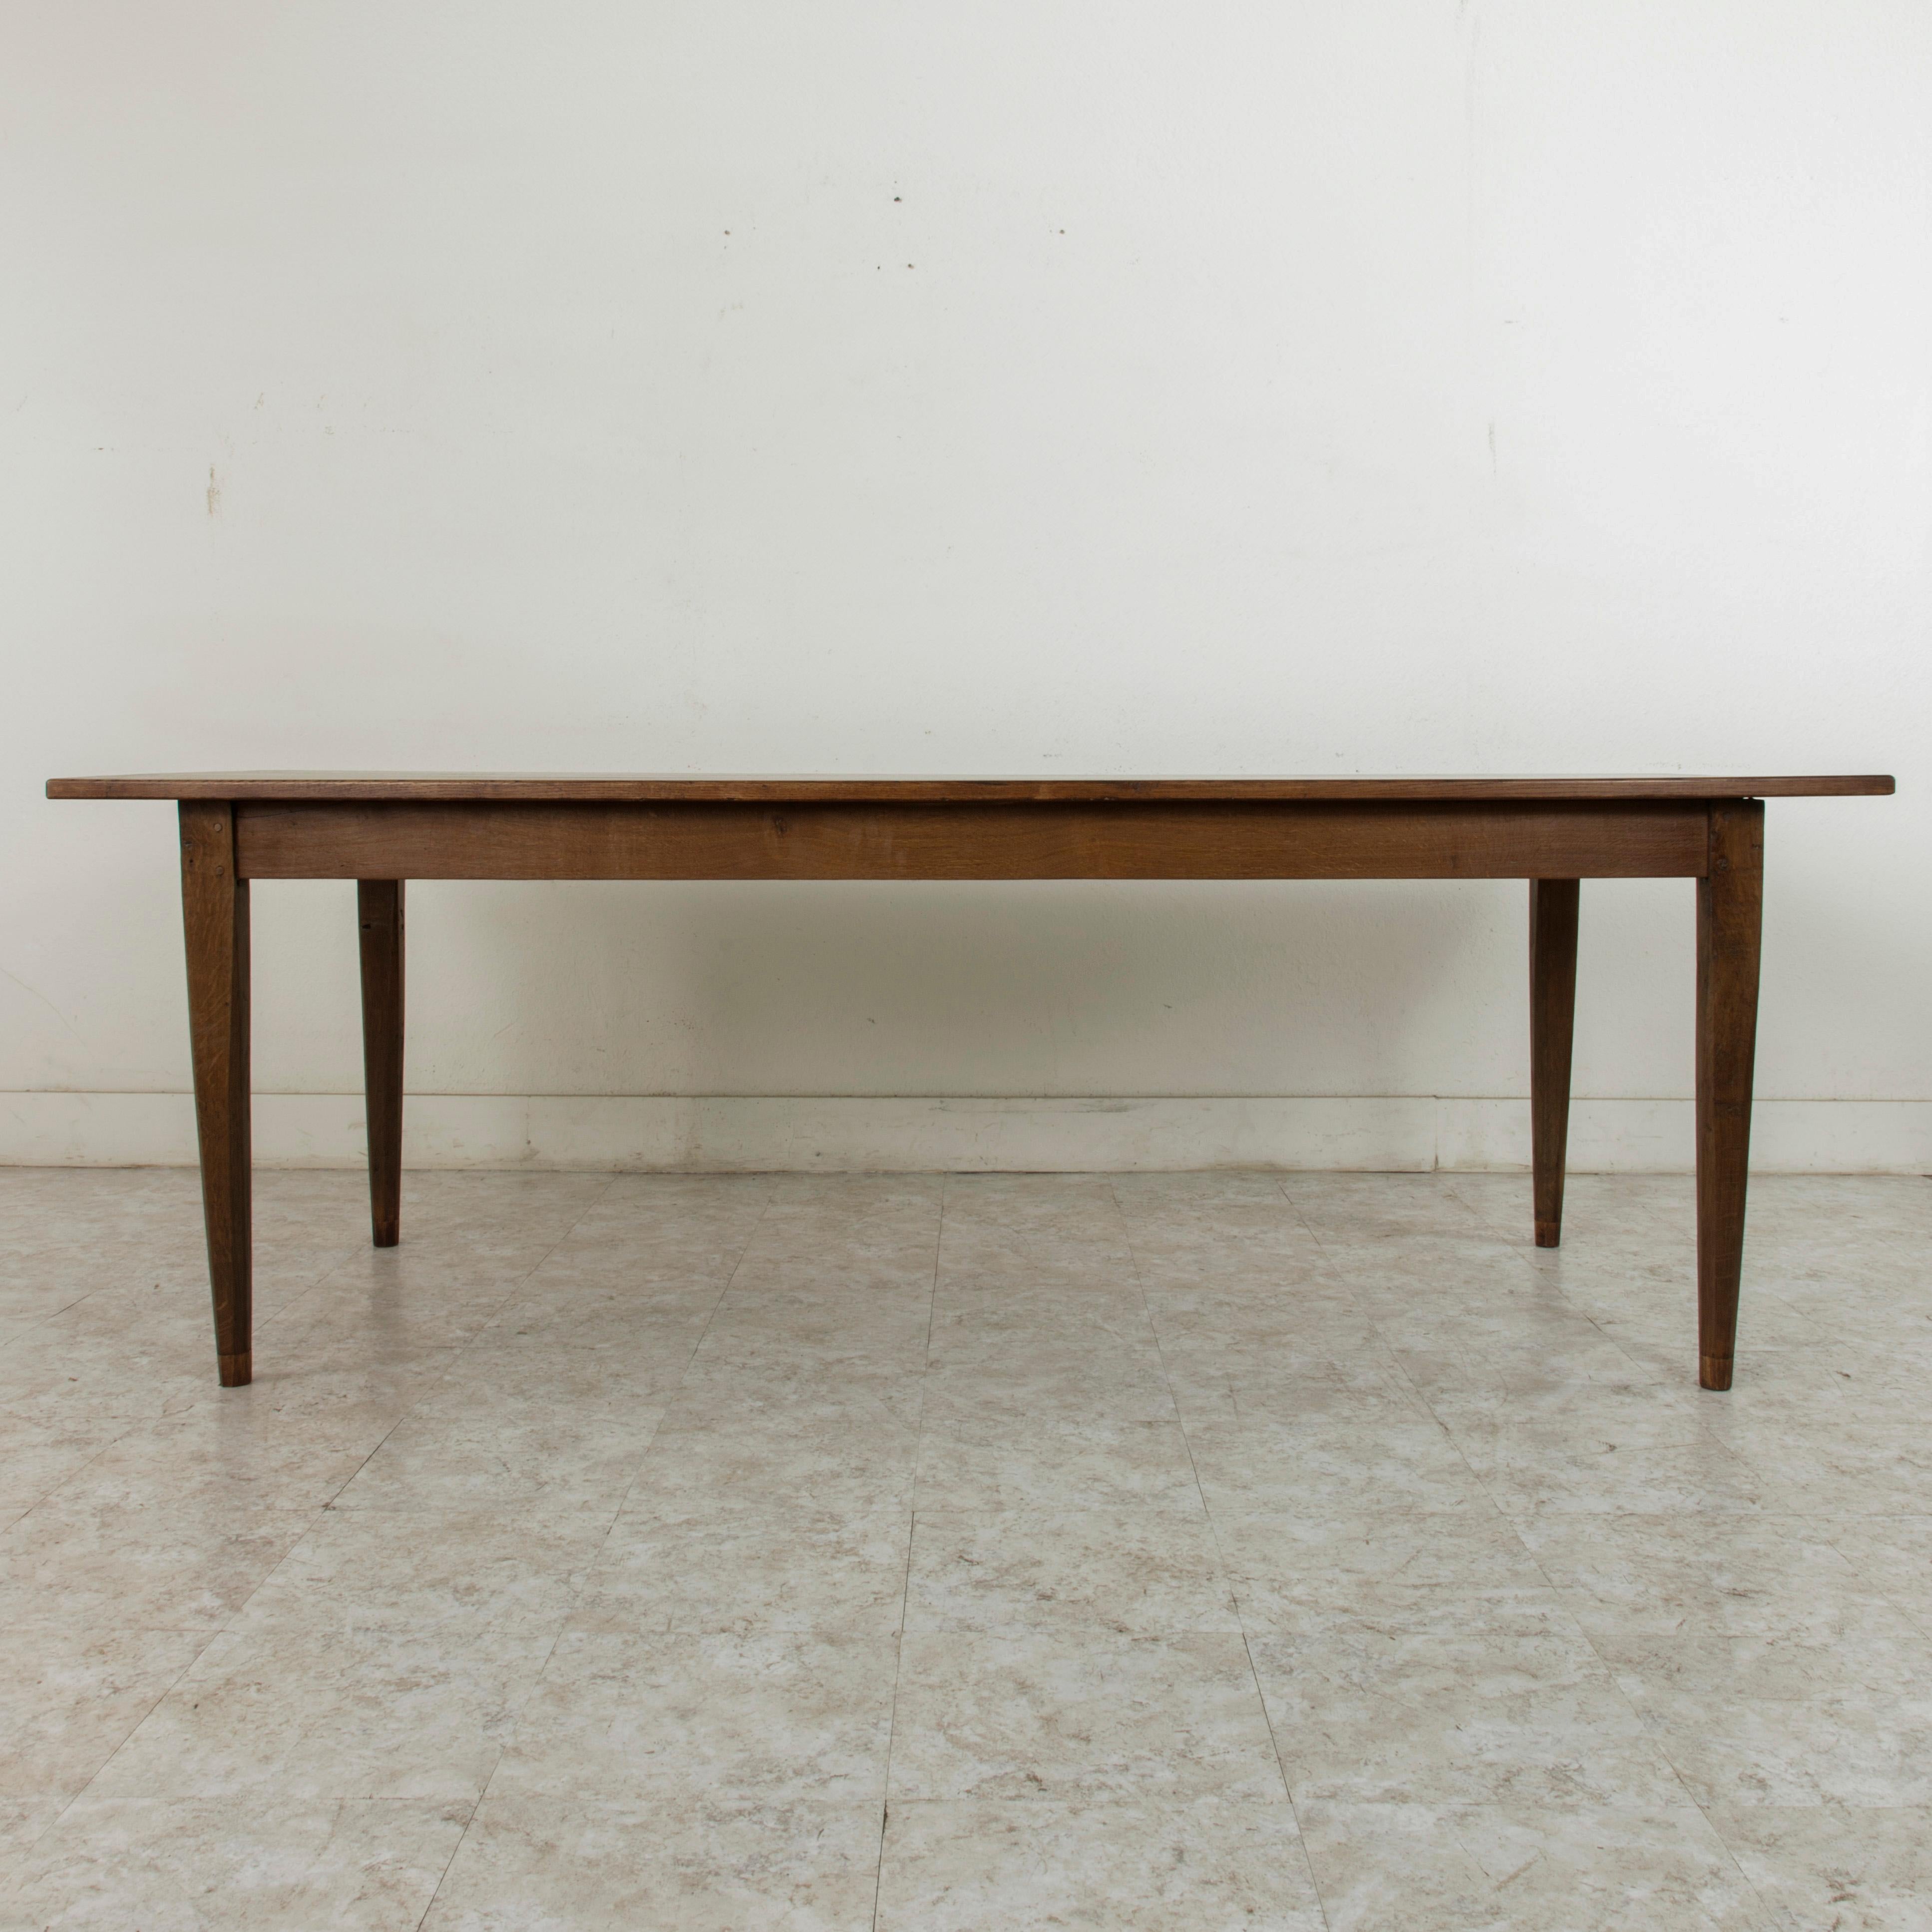 Early 20th Century French Artisan Made Oak Farm Table or Dining Table with Single-Drawer circa 1900